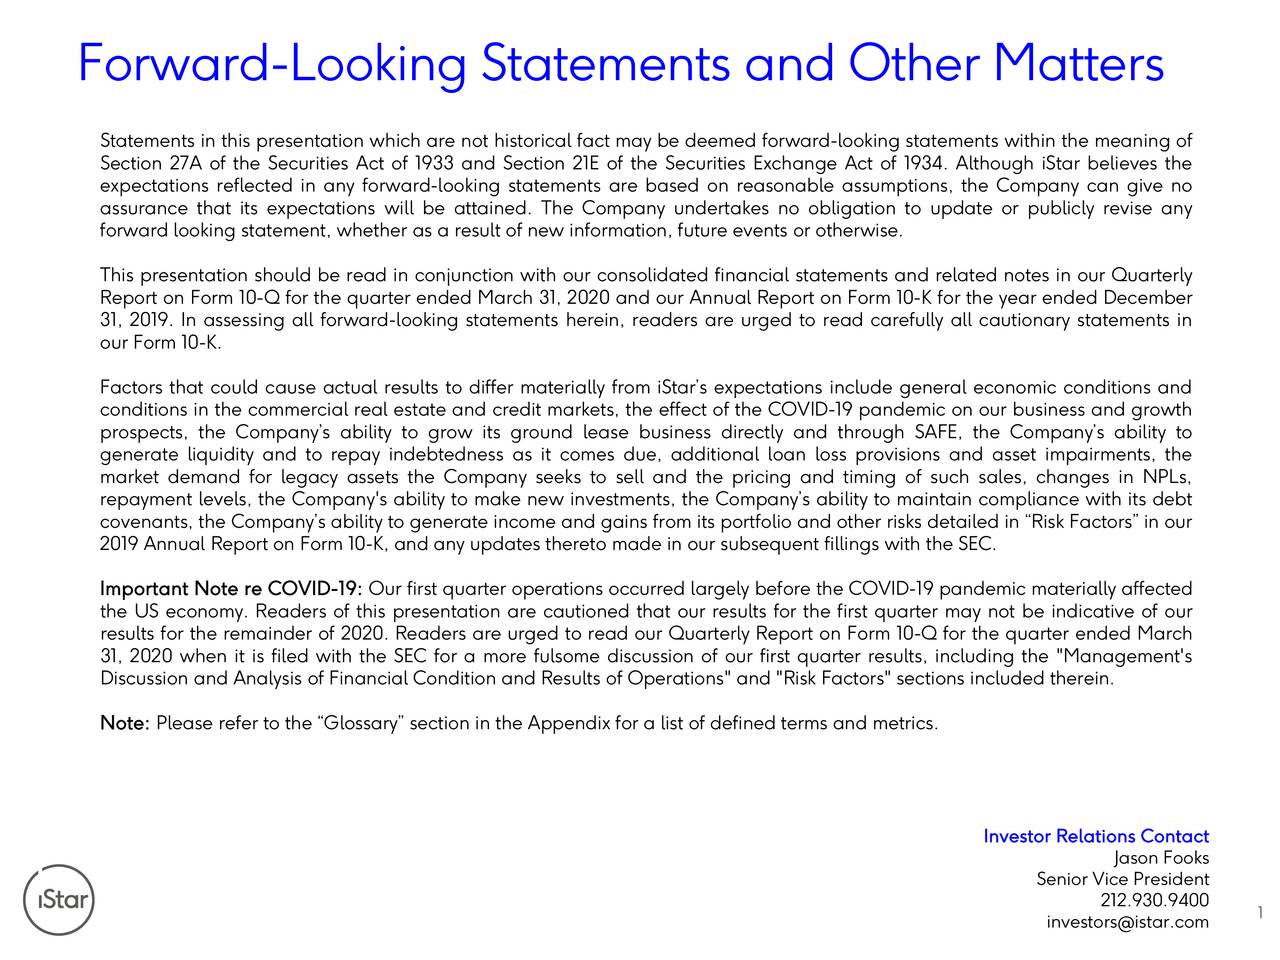 Forward-Looking Statements and Other Matters